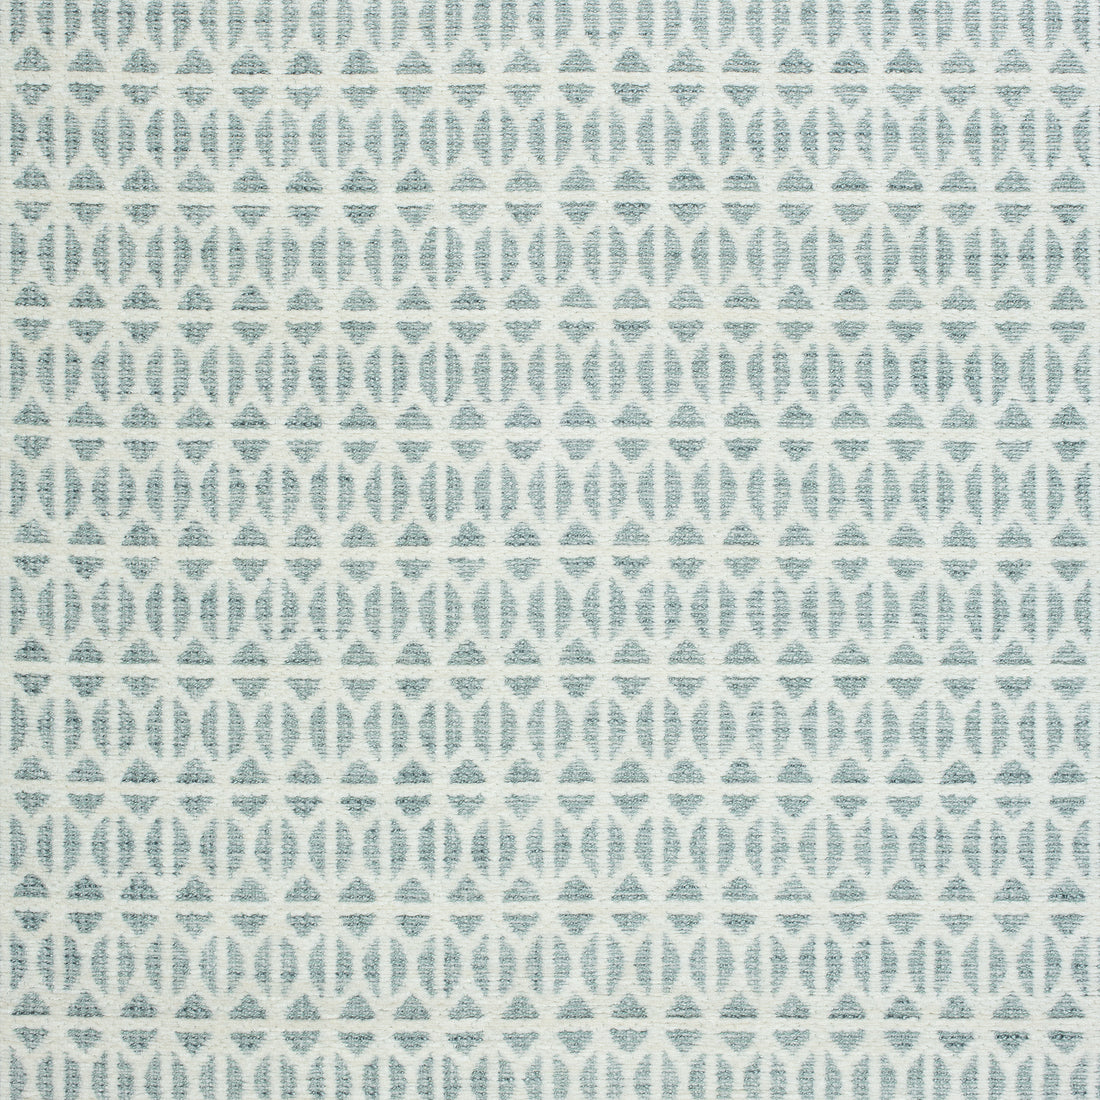 Quinlan fabric in mineral color - pattern number W789105 - by Thibaut in the Reverie collection